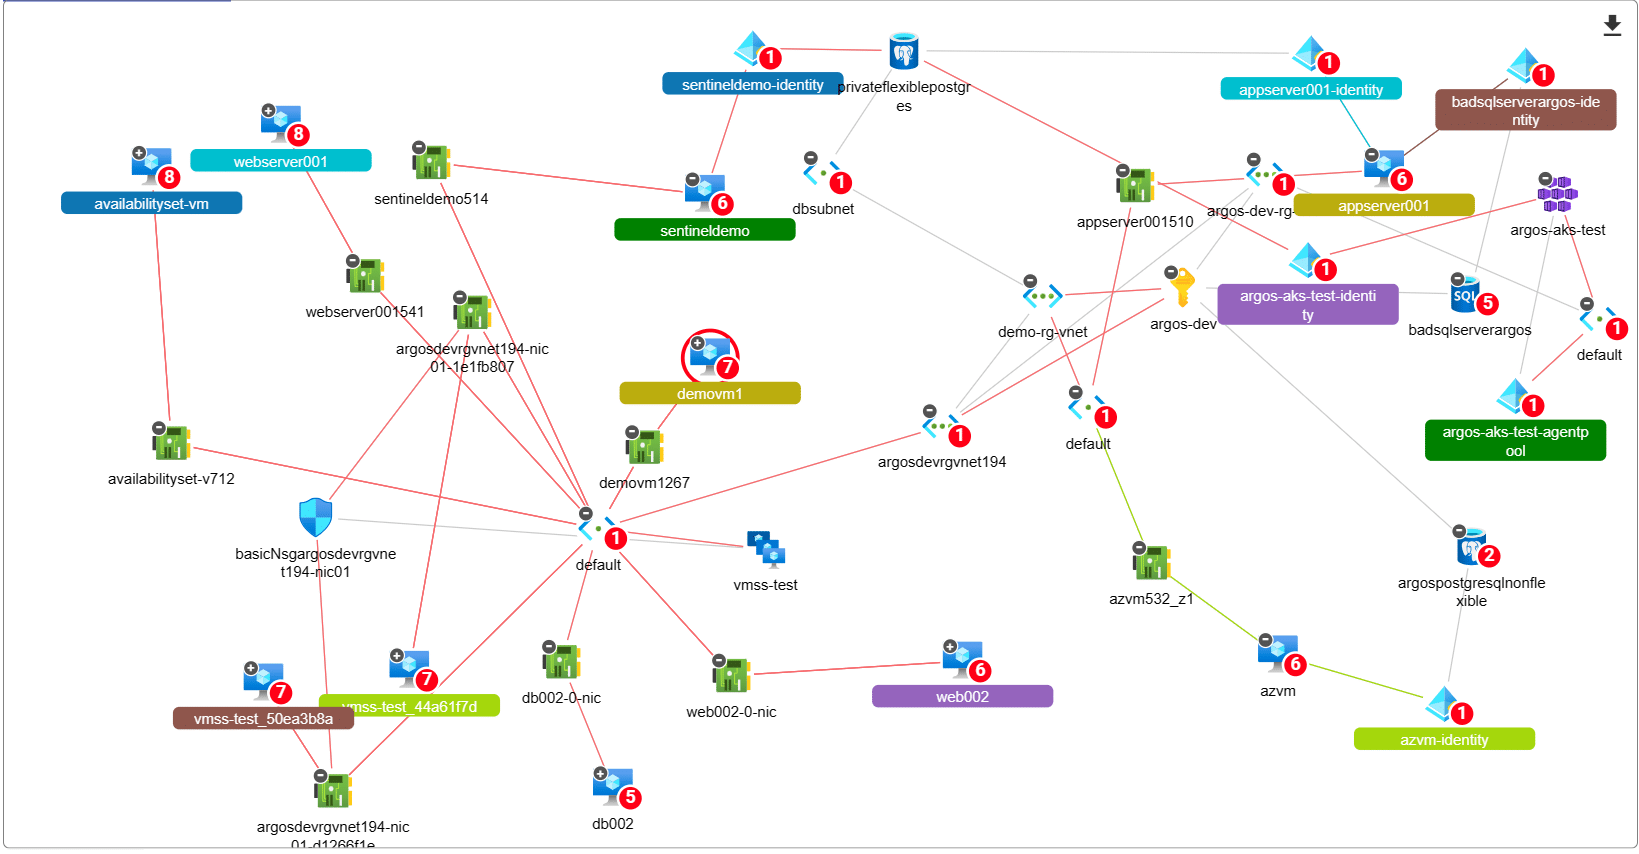 Discovering Attack Paths in Microsoft Azure for Enhanced Security